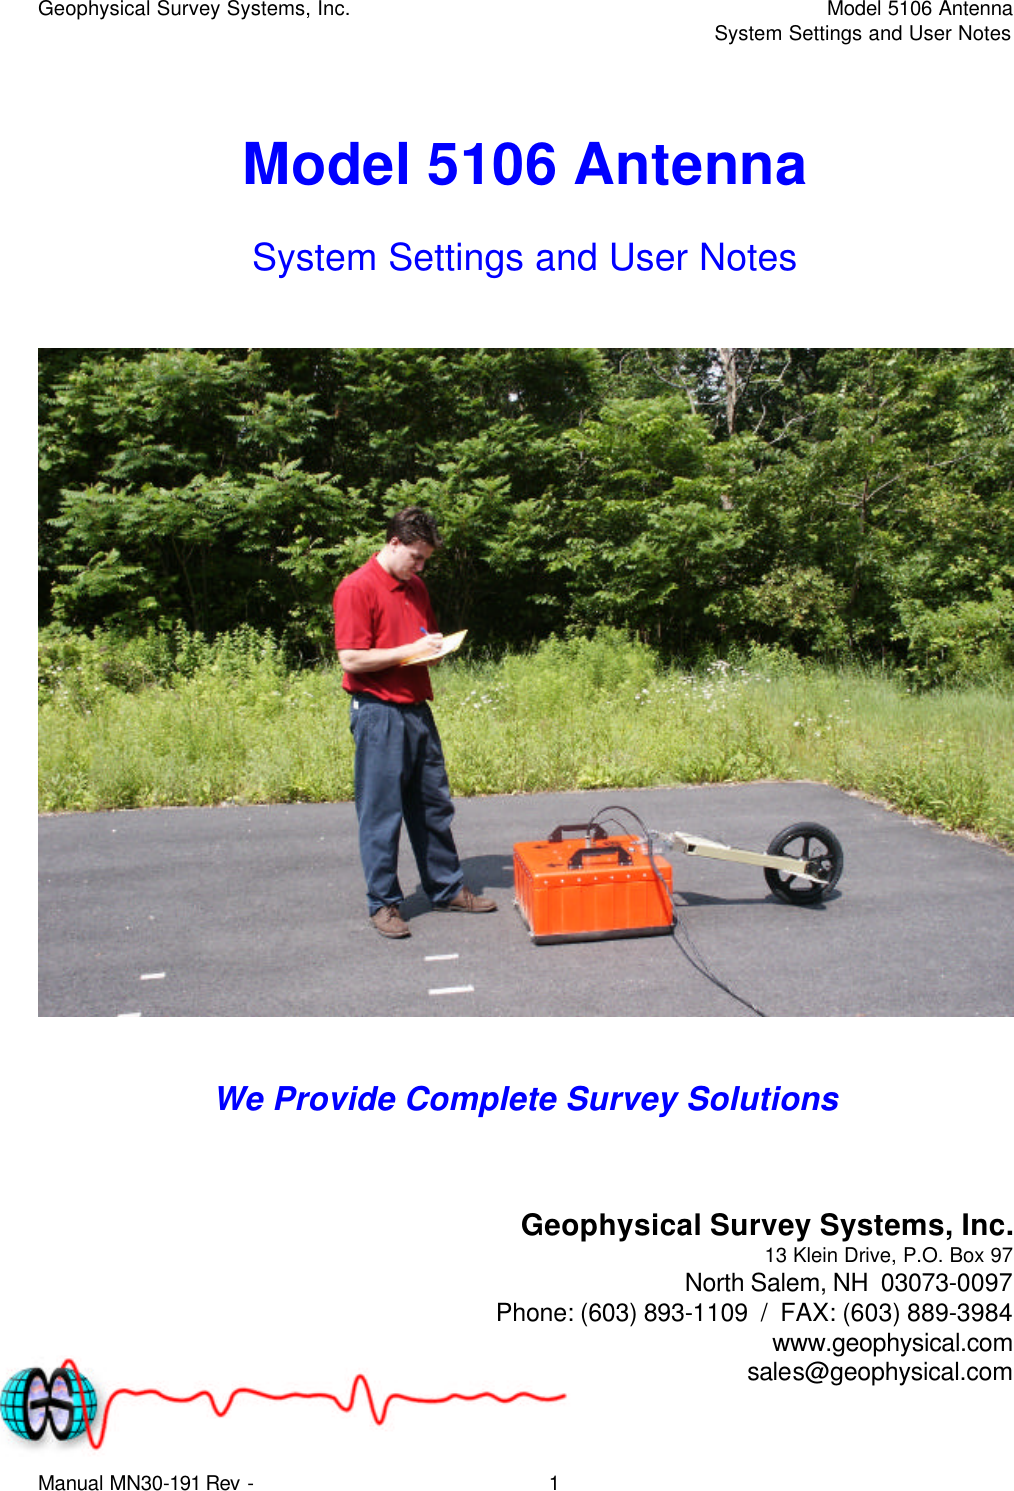 Geophysical Survey Systems, Inc.    Model 5106 Antenna     System Settings and User Notes Manual MN30-191 Rev - 1  Model 5106 Antenna System Settings and User Notes     We Provide Complete Survey Solutions    Geophysical Survey Systems, Inc. 13 Klein Drive, P.O. Box 97 North Salem, NH  03073-0097 Phone: (603) 893-1109  /  FAX: (603) 889-3984 www.geophysical.com sales@geophysical.com 